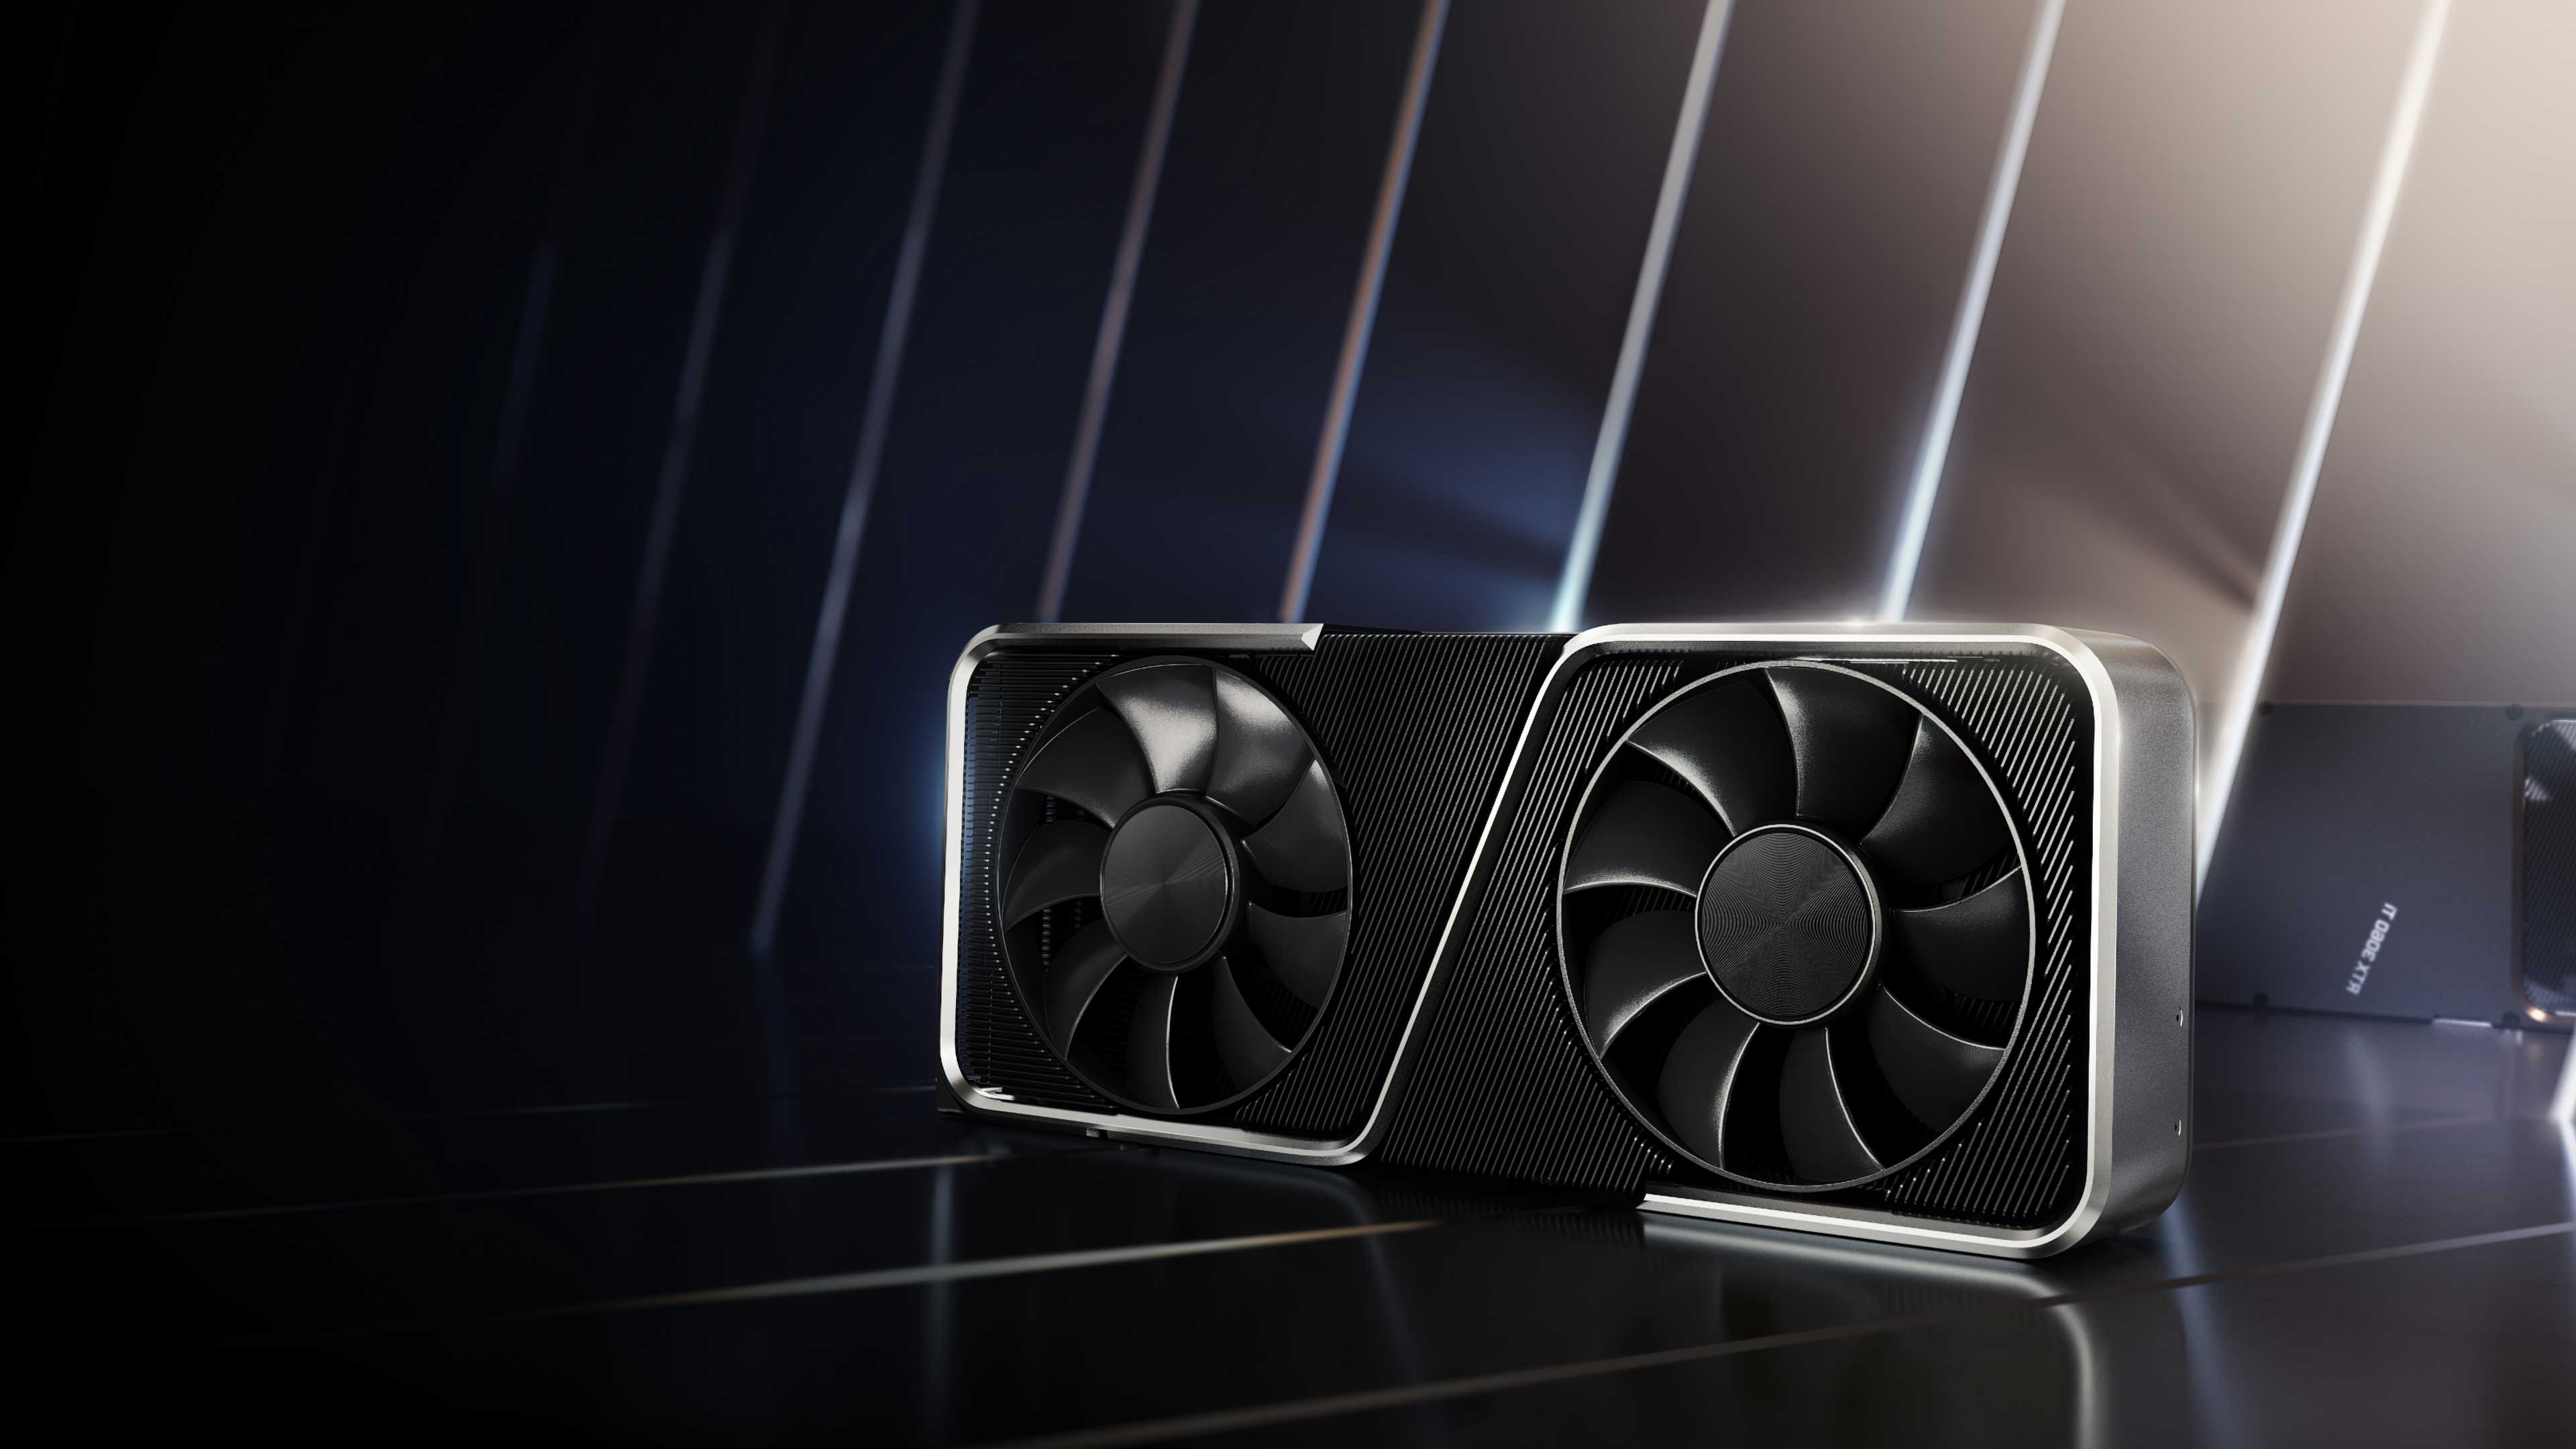 GeForce RTX 3060 Ti Out Now: Faster Than RTX 2080 SUPER, Starting At $399 |  GeForce News | NVIDIA